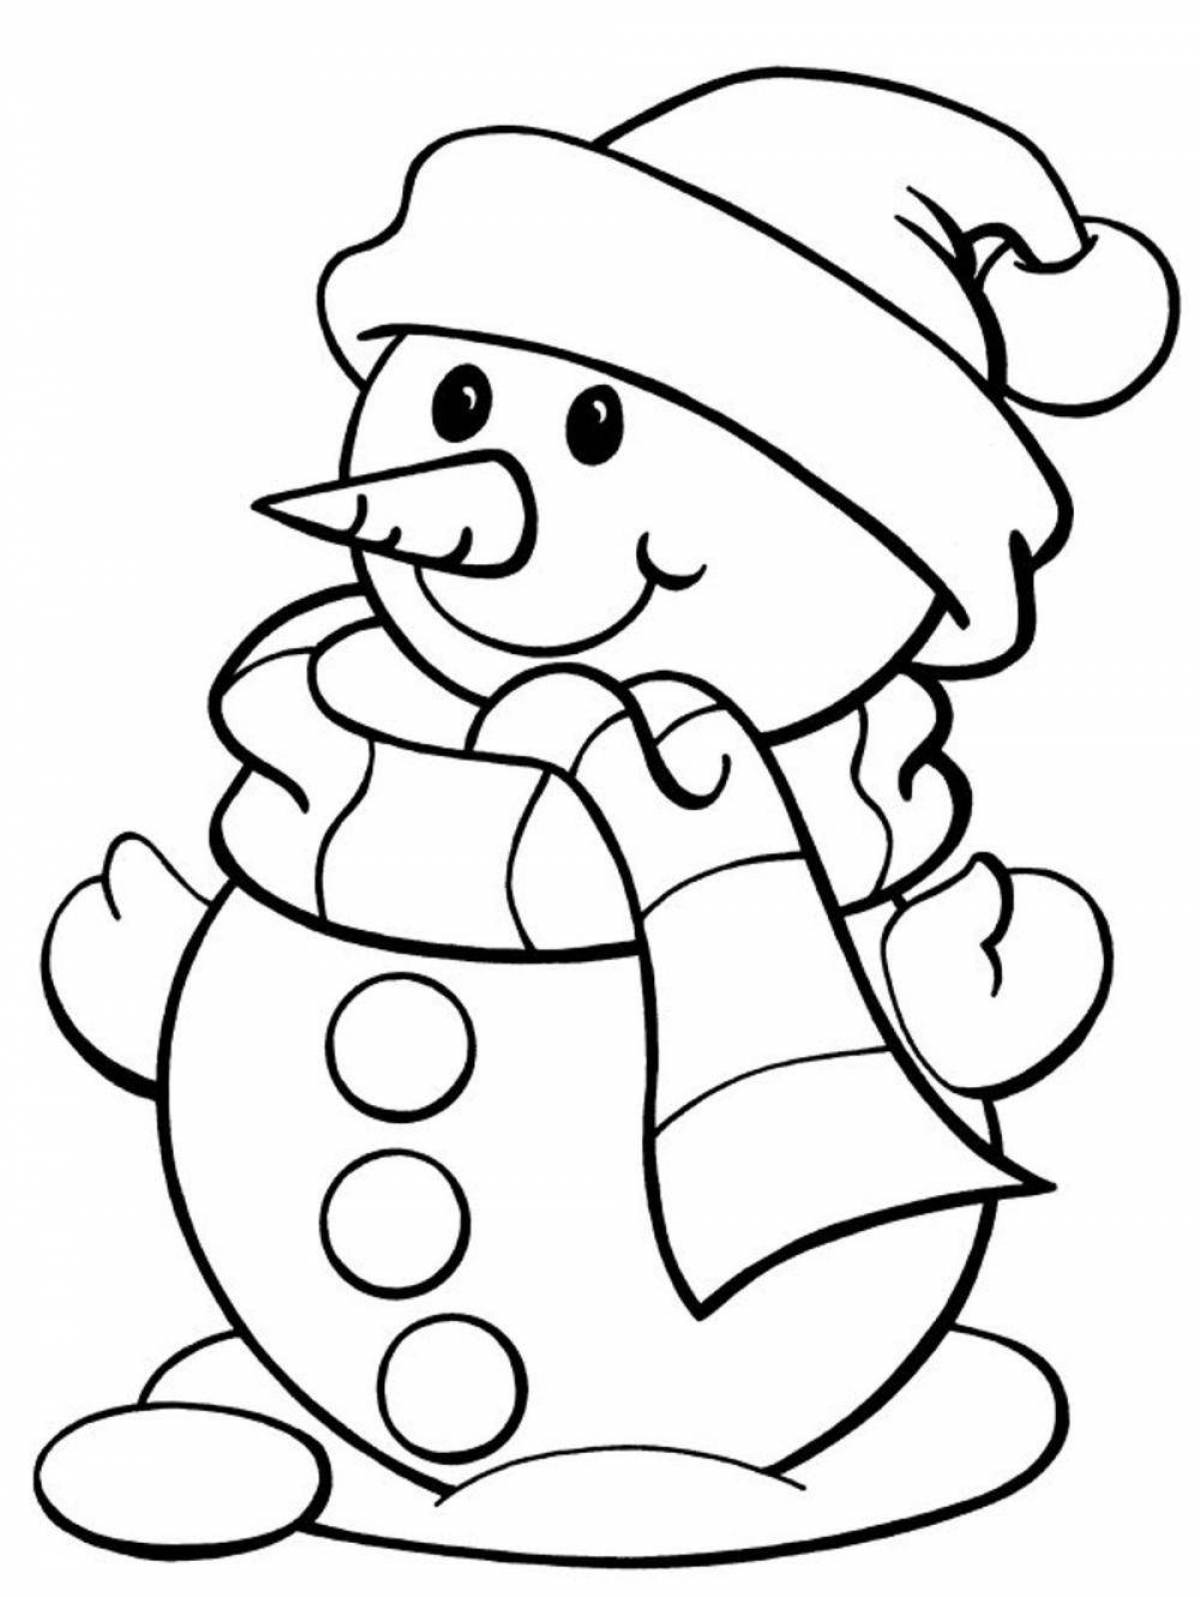 Adorable snowman coloring book for kids 4-5 years old